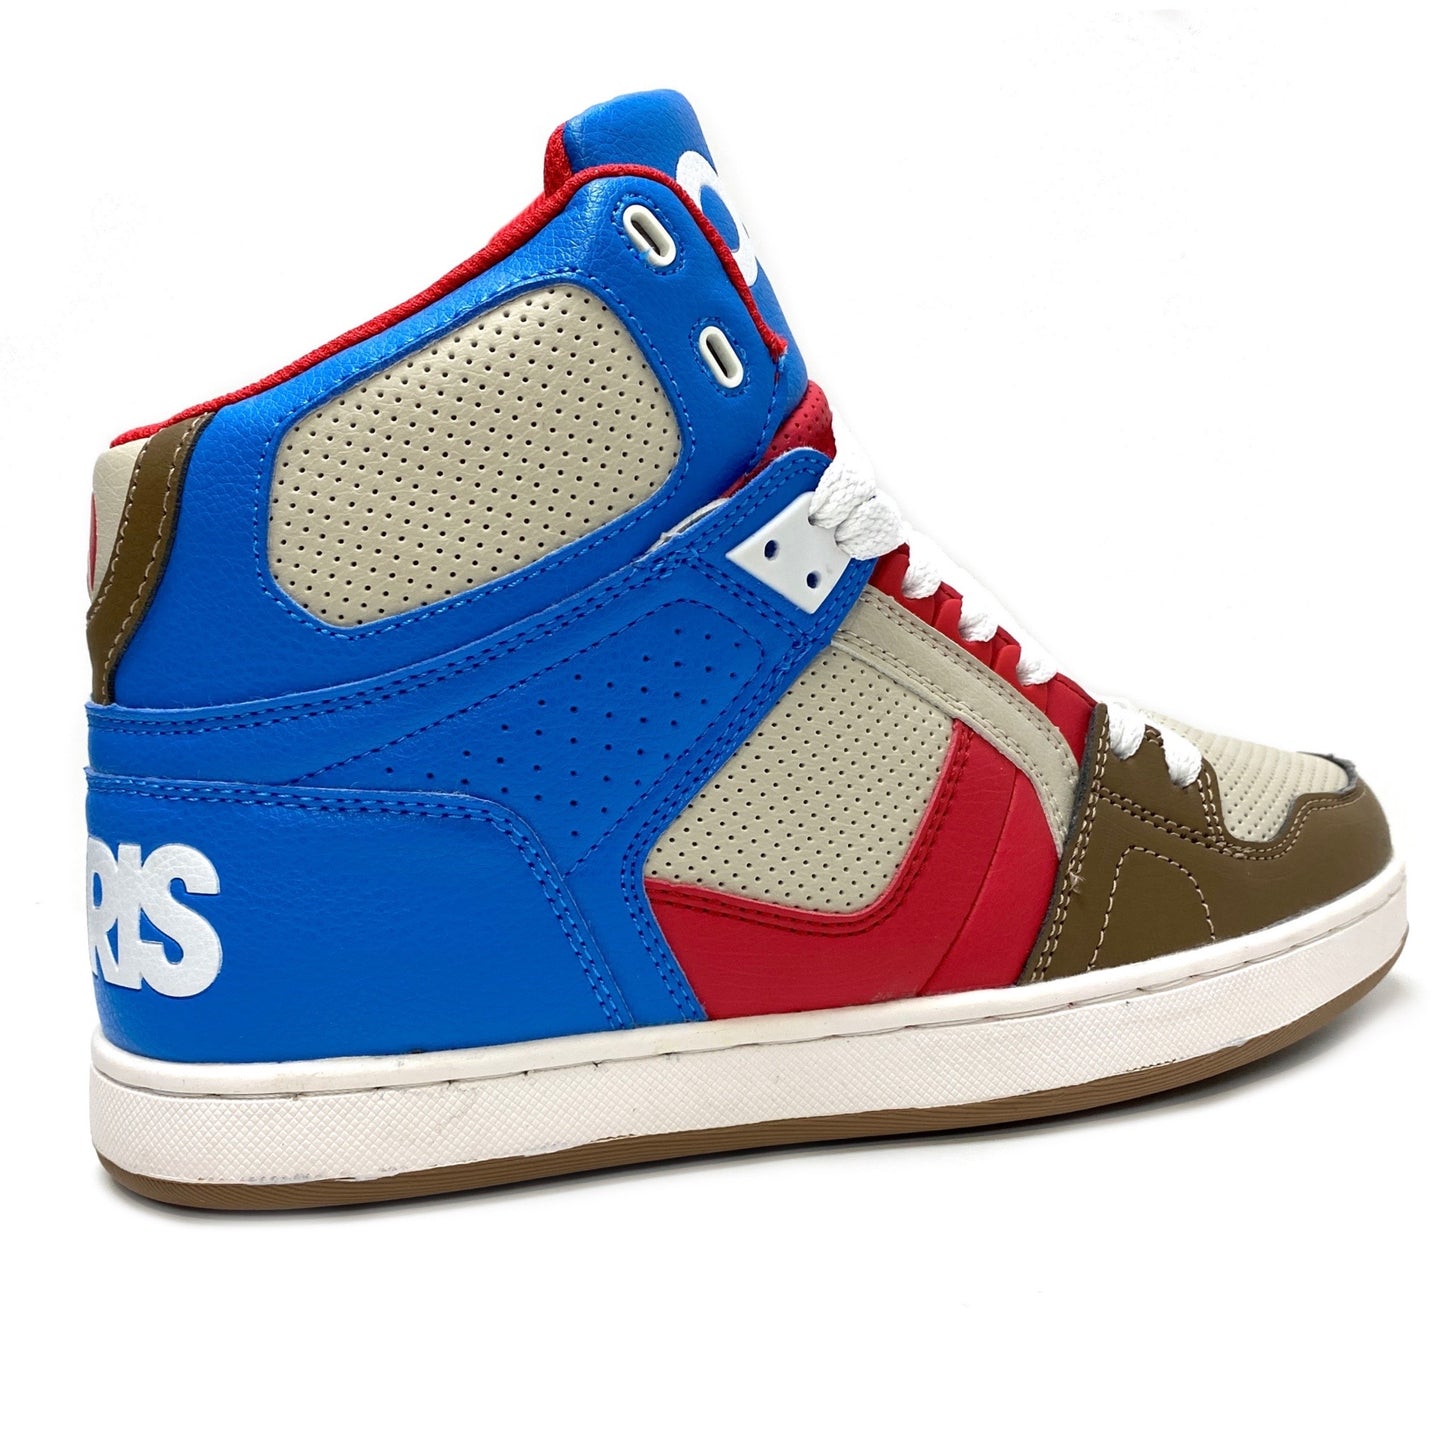 OSIRIS SHOES NYC 83 CLK BLUE CREAM & RED TRAINERS